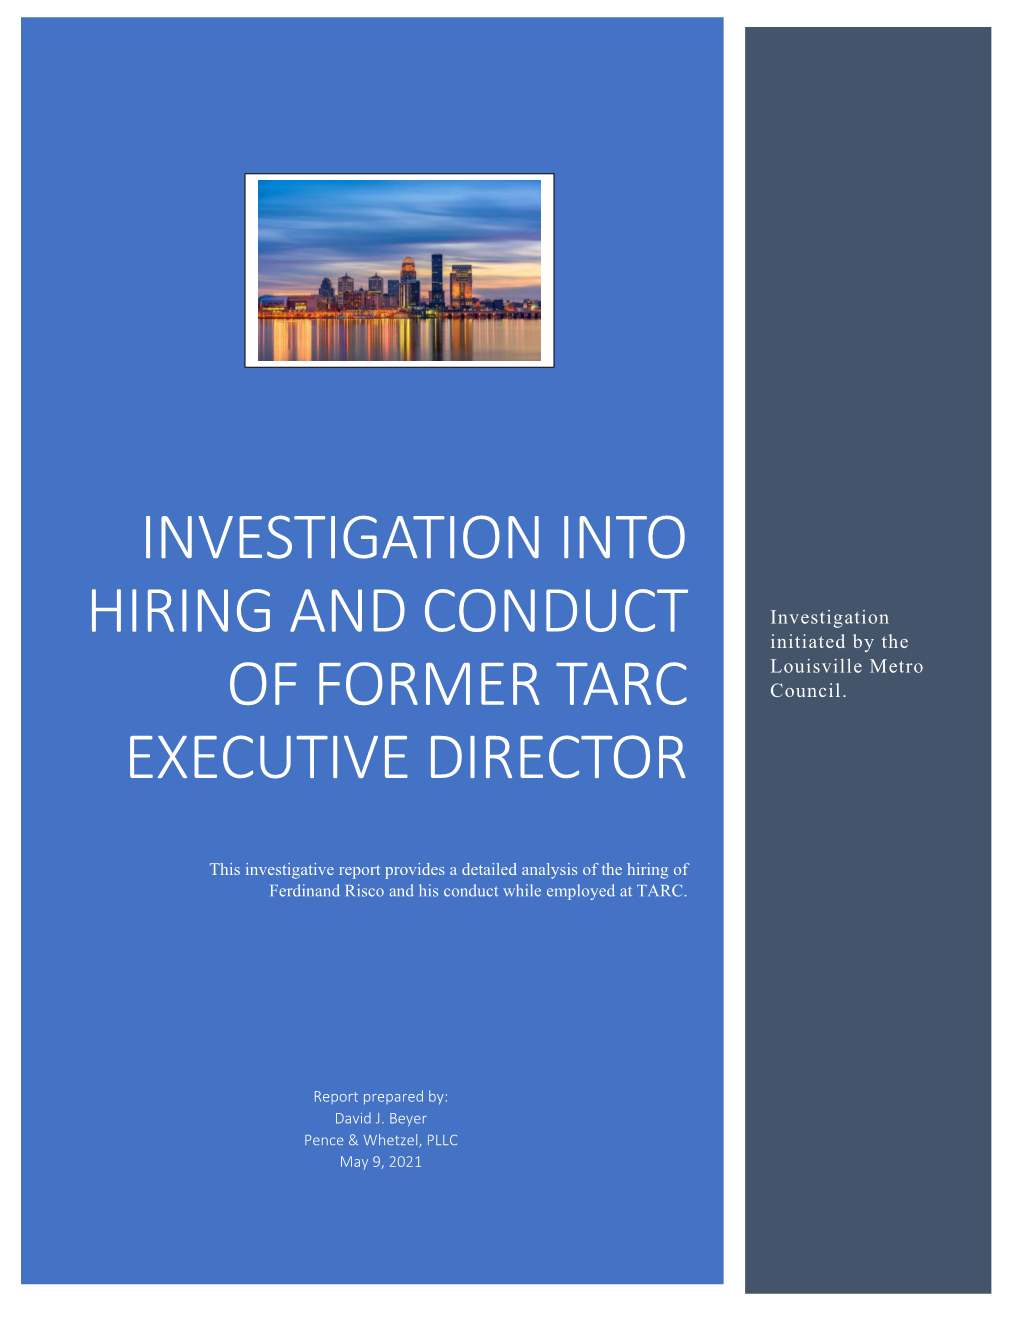 INVESTIGATION INTO HIRING and Conduct of FORMER TARC